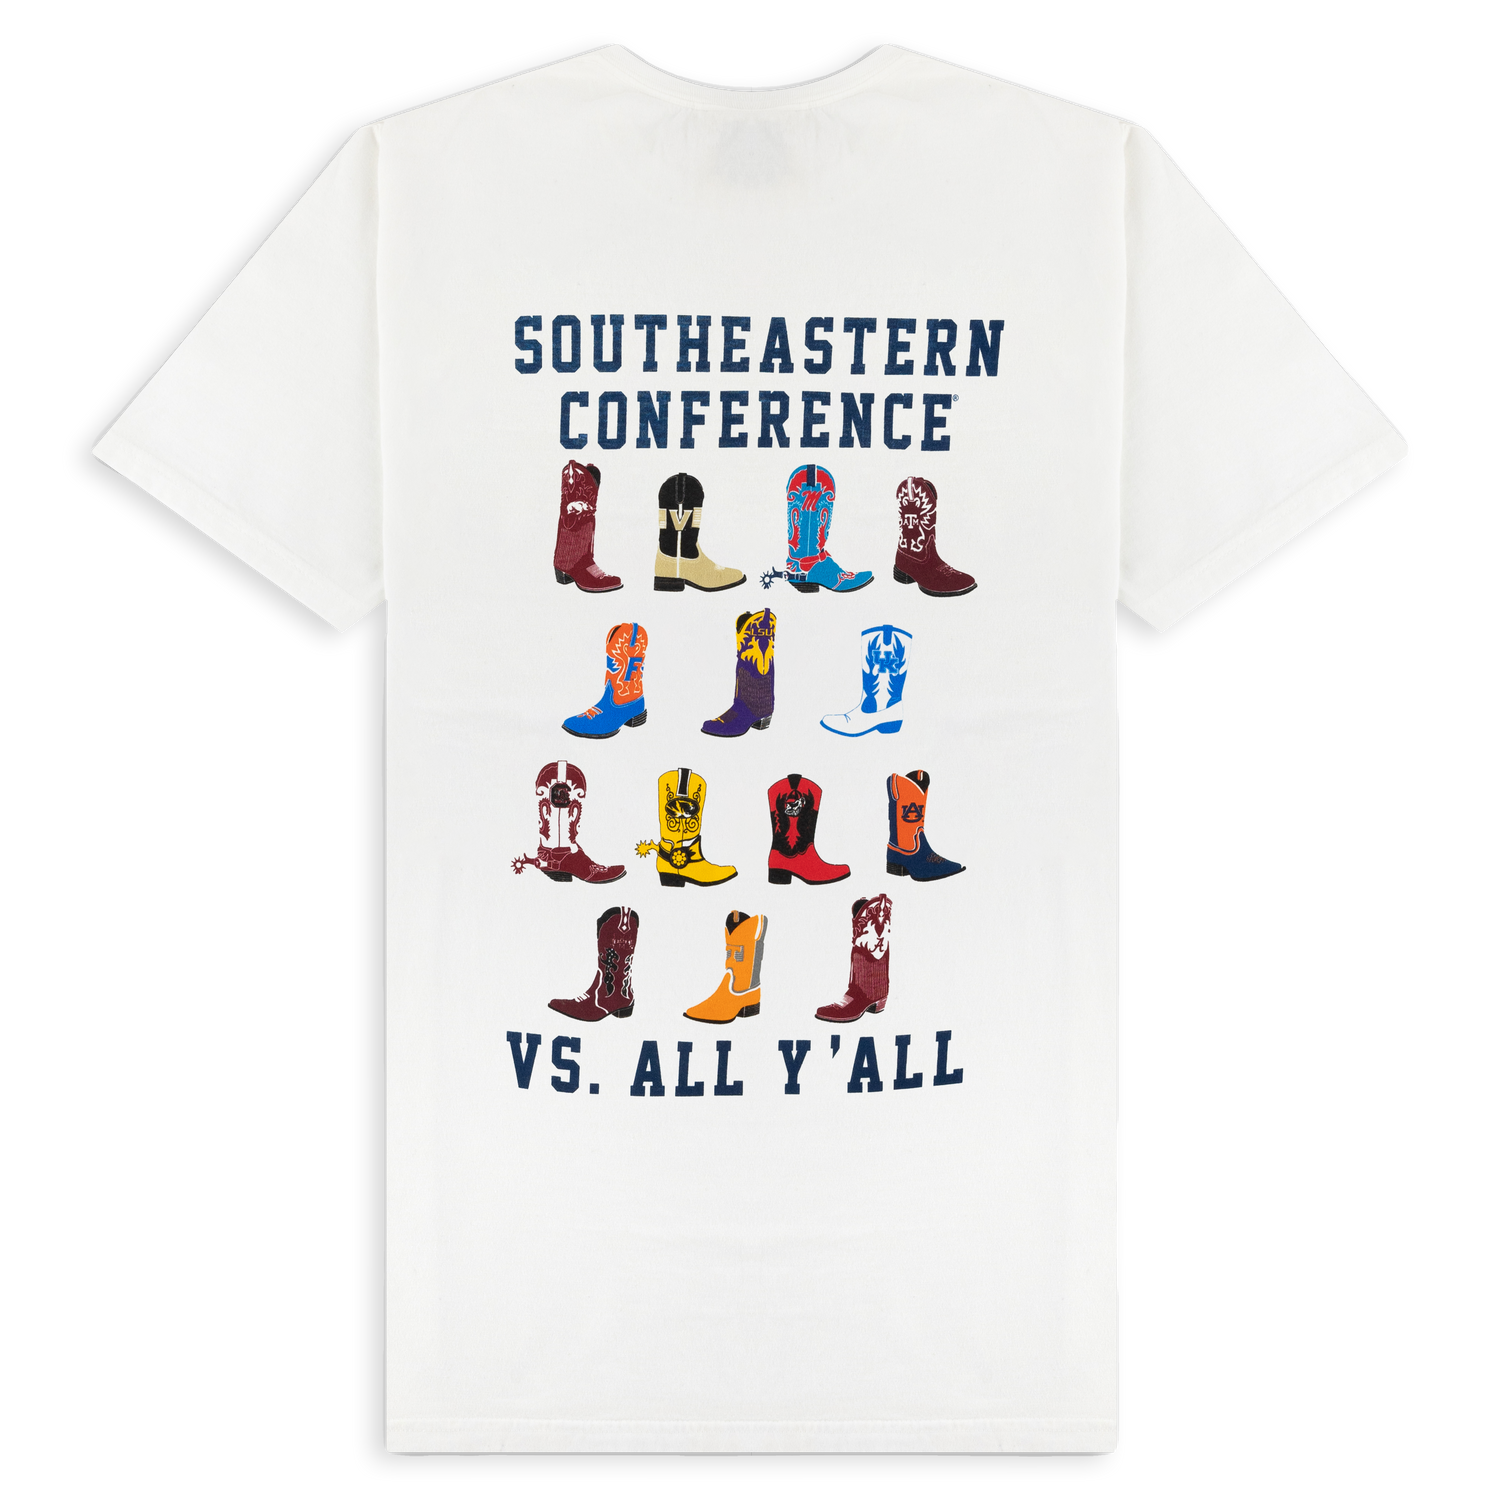 Y'all Yeti for This' Women's T-Shirt